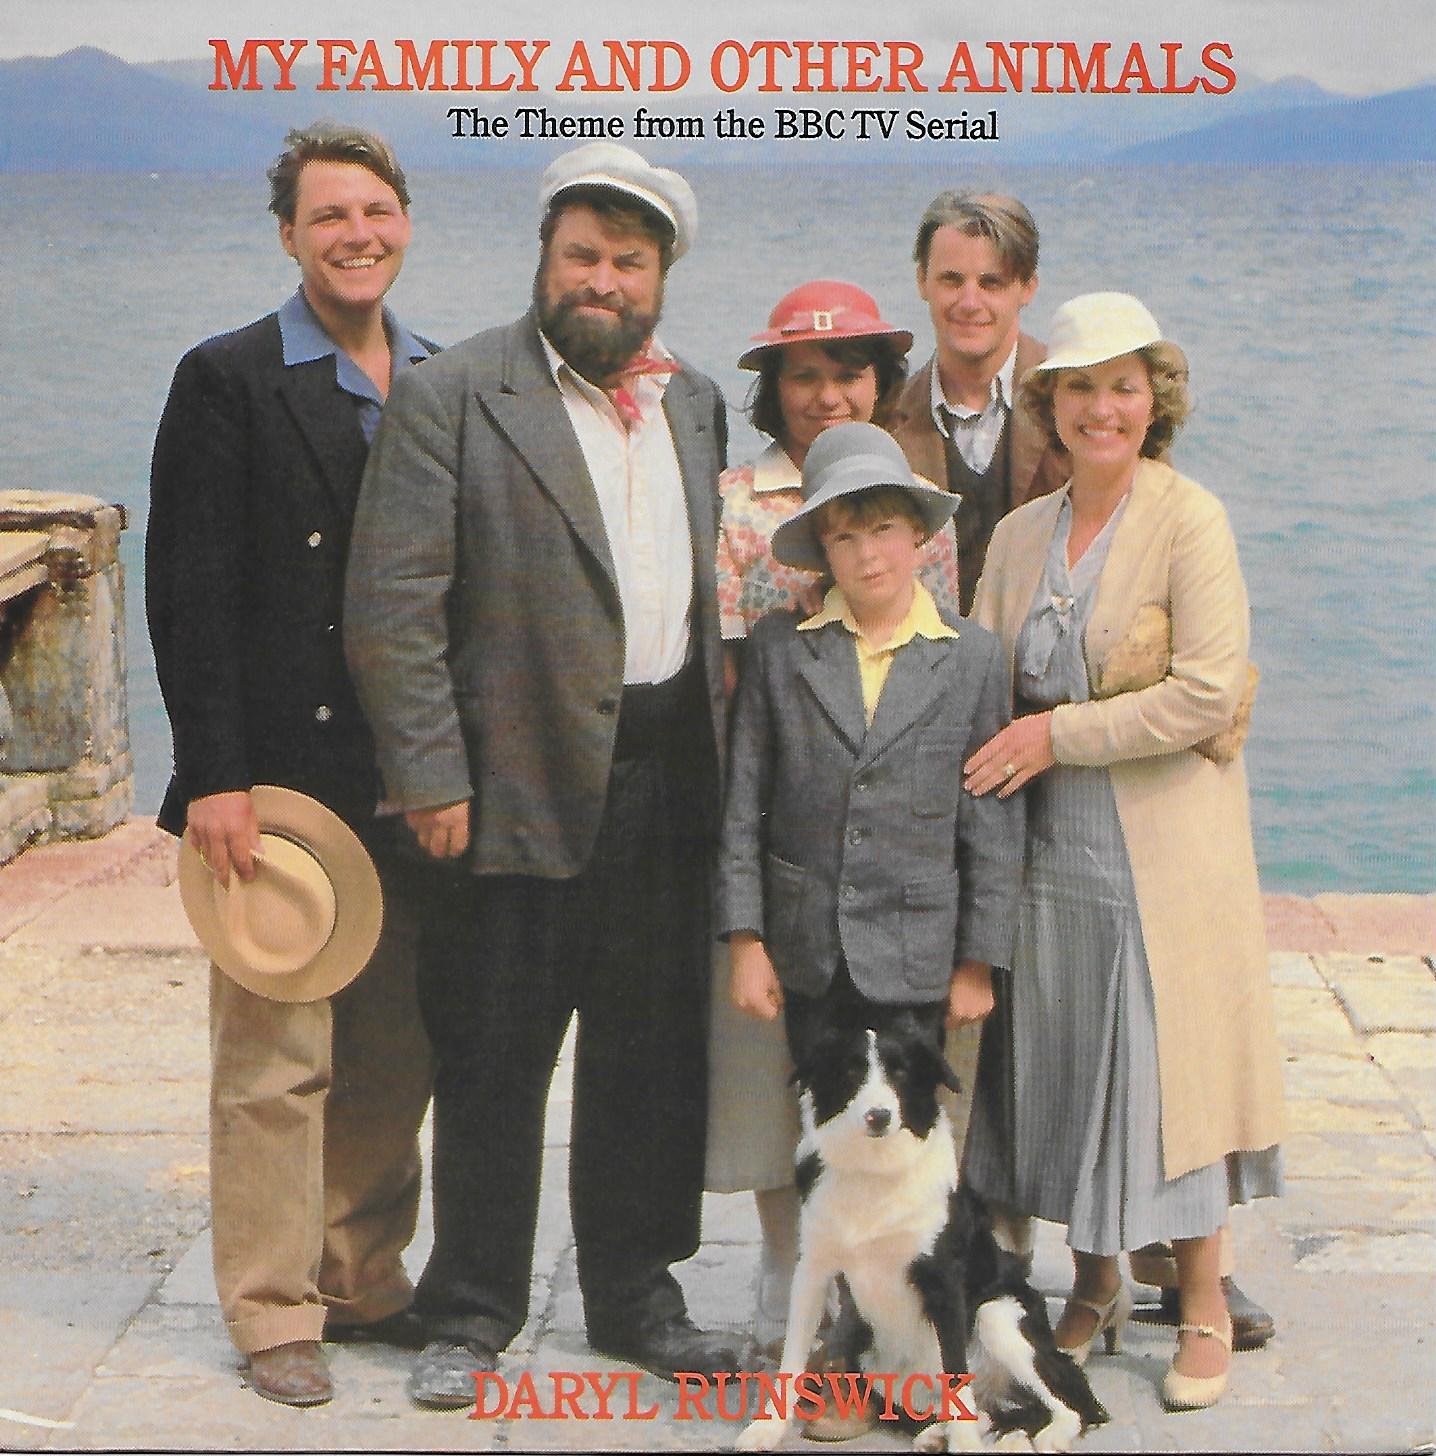 Picture of My family and other animals by artist Darly Runswick / Ken Barrie from the BBC singles - Records and Tapes library